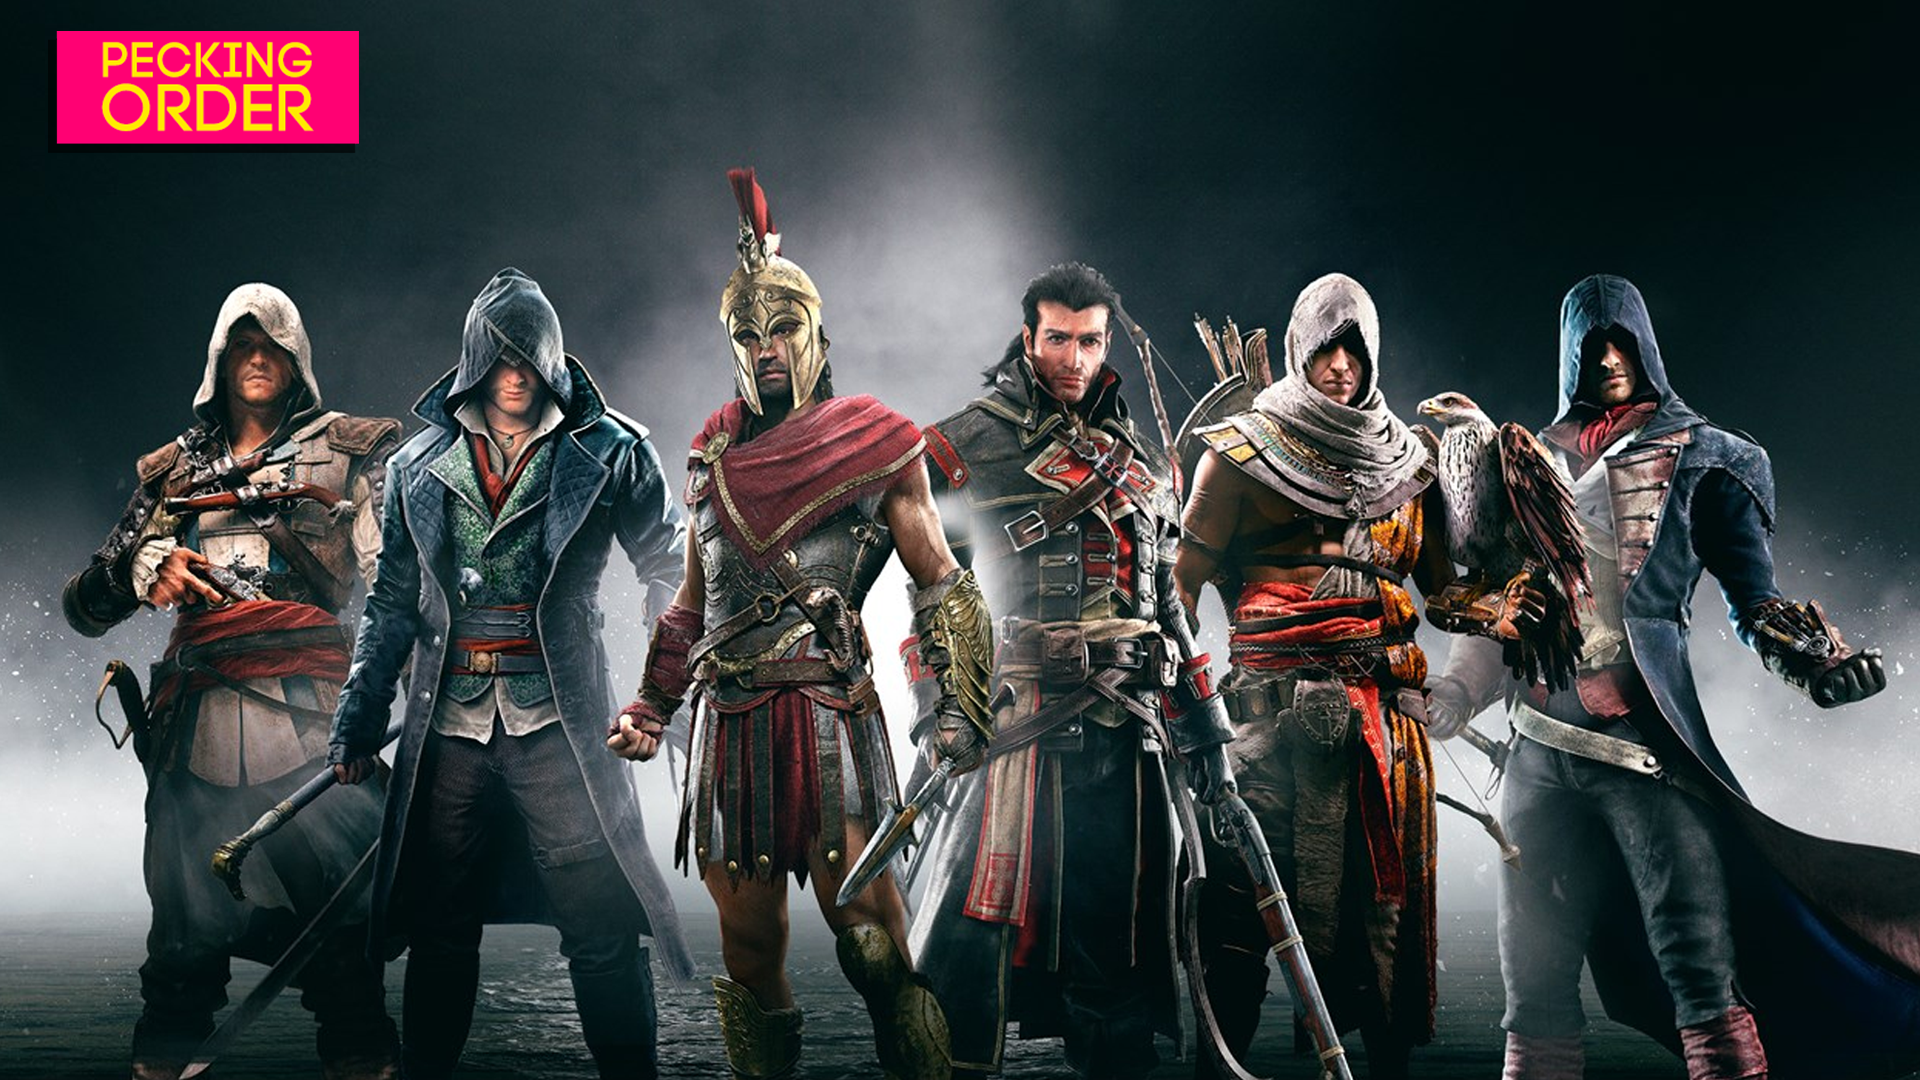 Assassin's Creed Unity  The Most Controversial AC Game 